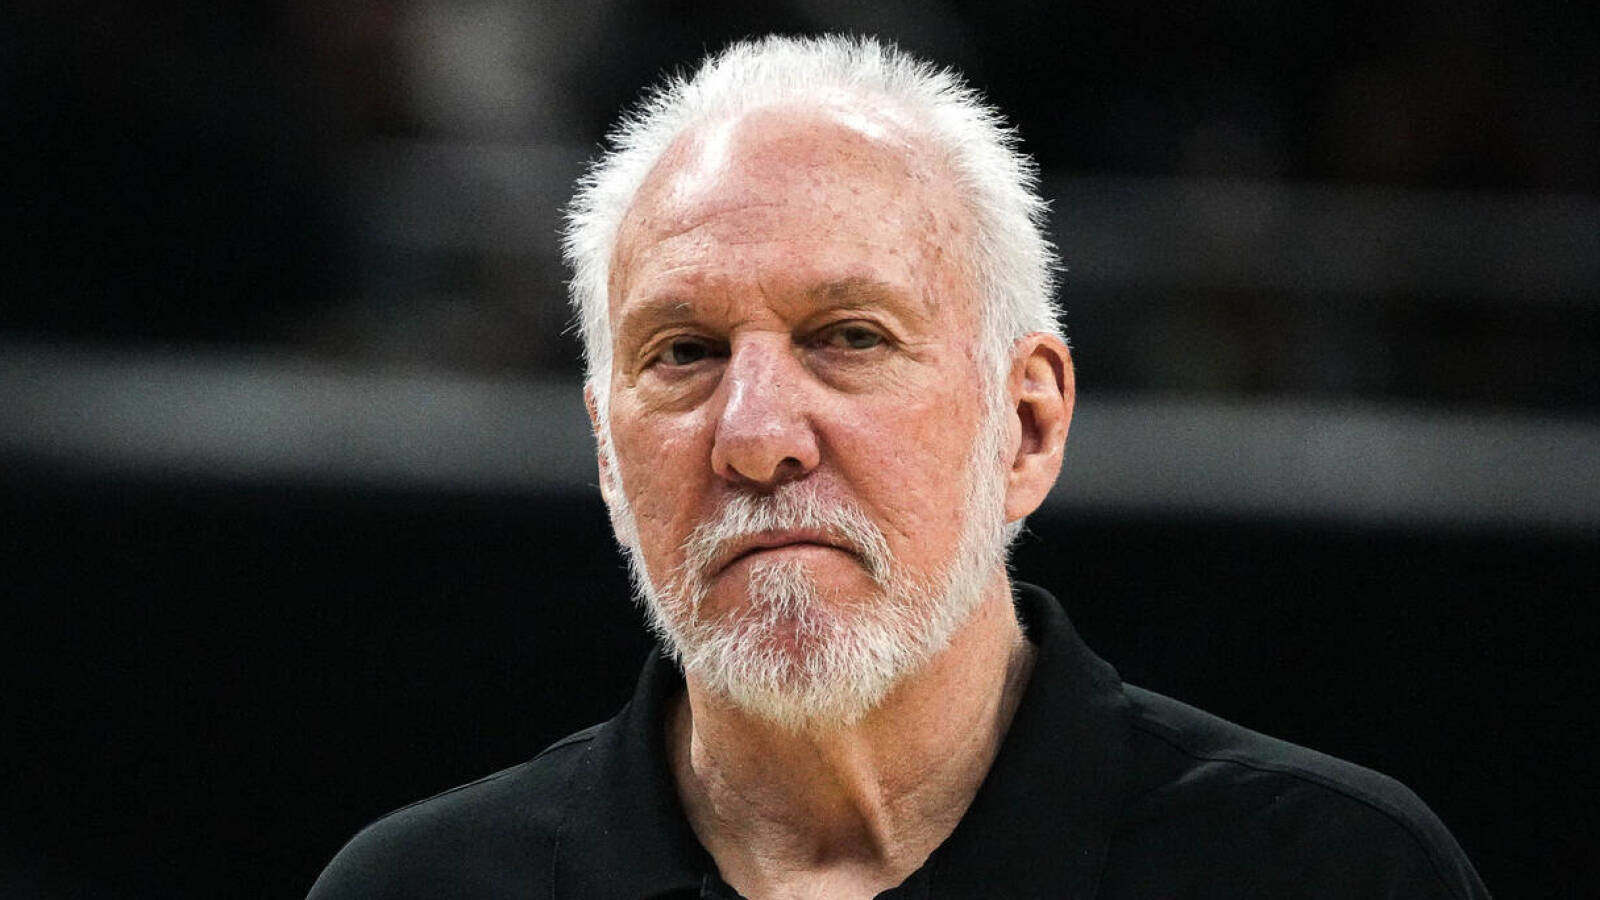 After signing extension, Gregg Popovich is on pace for record-setting longevity